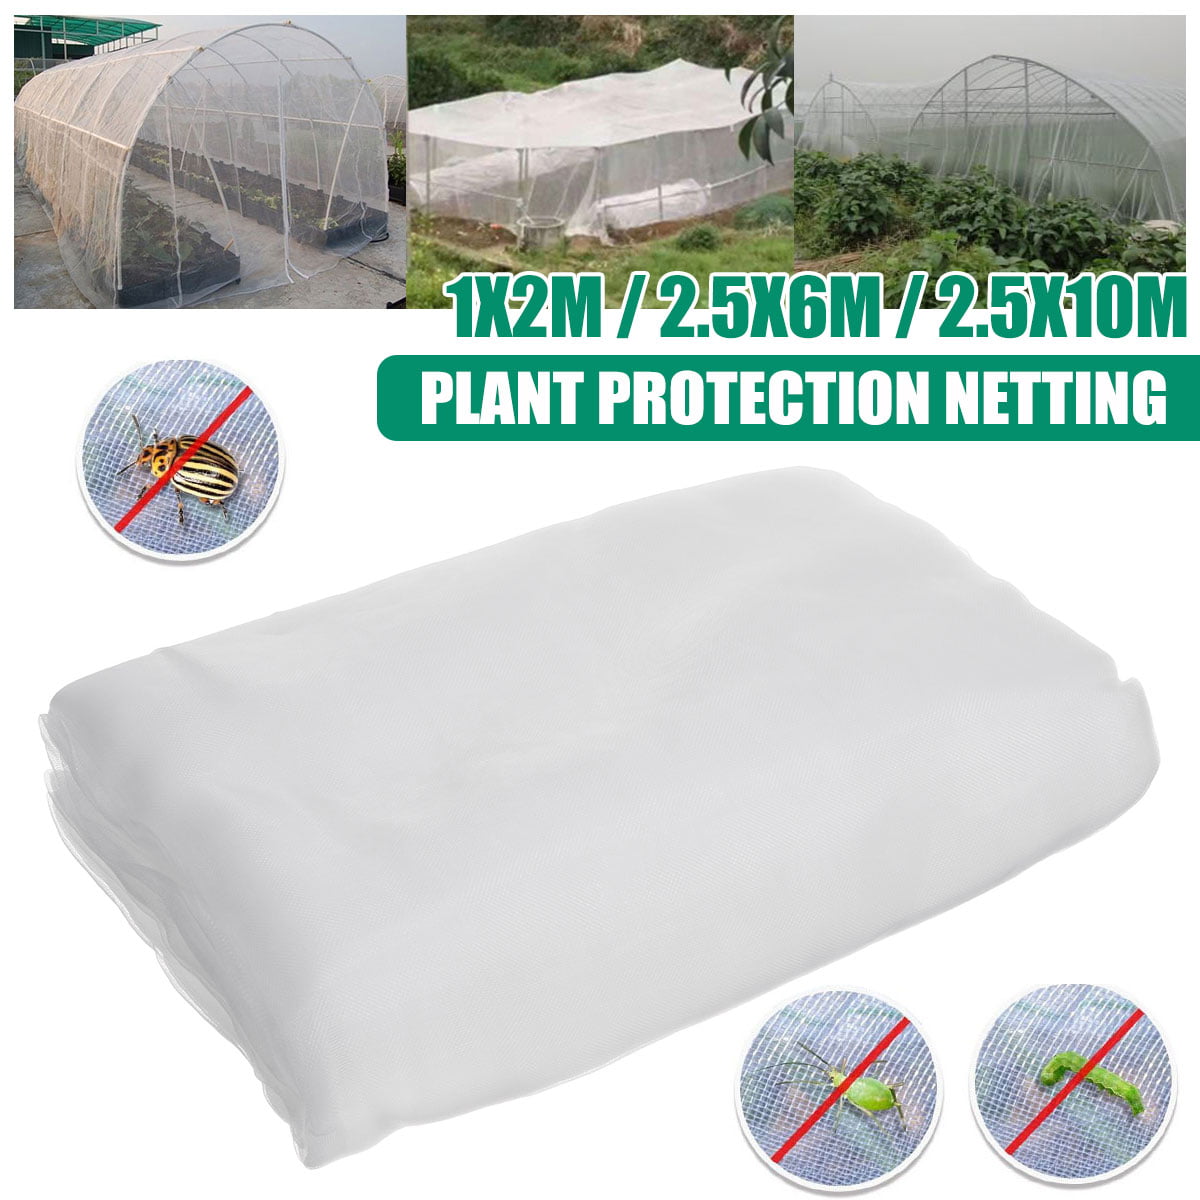 Garden Bug Net Insect Barrier Mosquito Screen Mesh Tree Plants Herb Patio Cover 